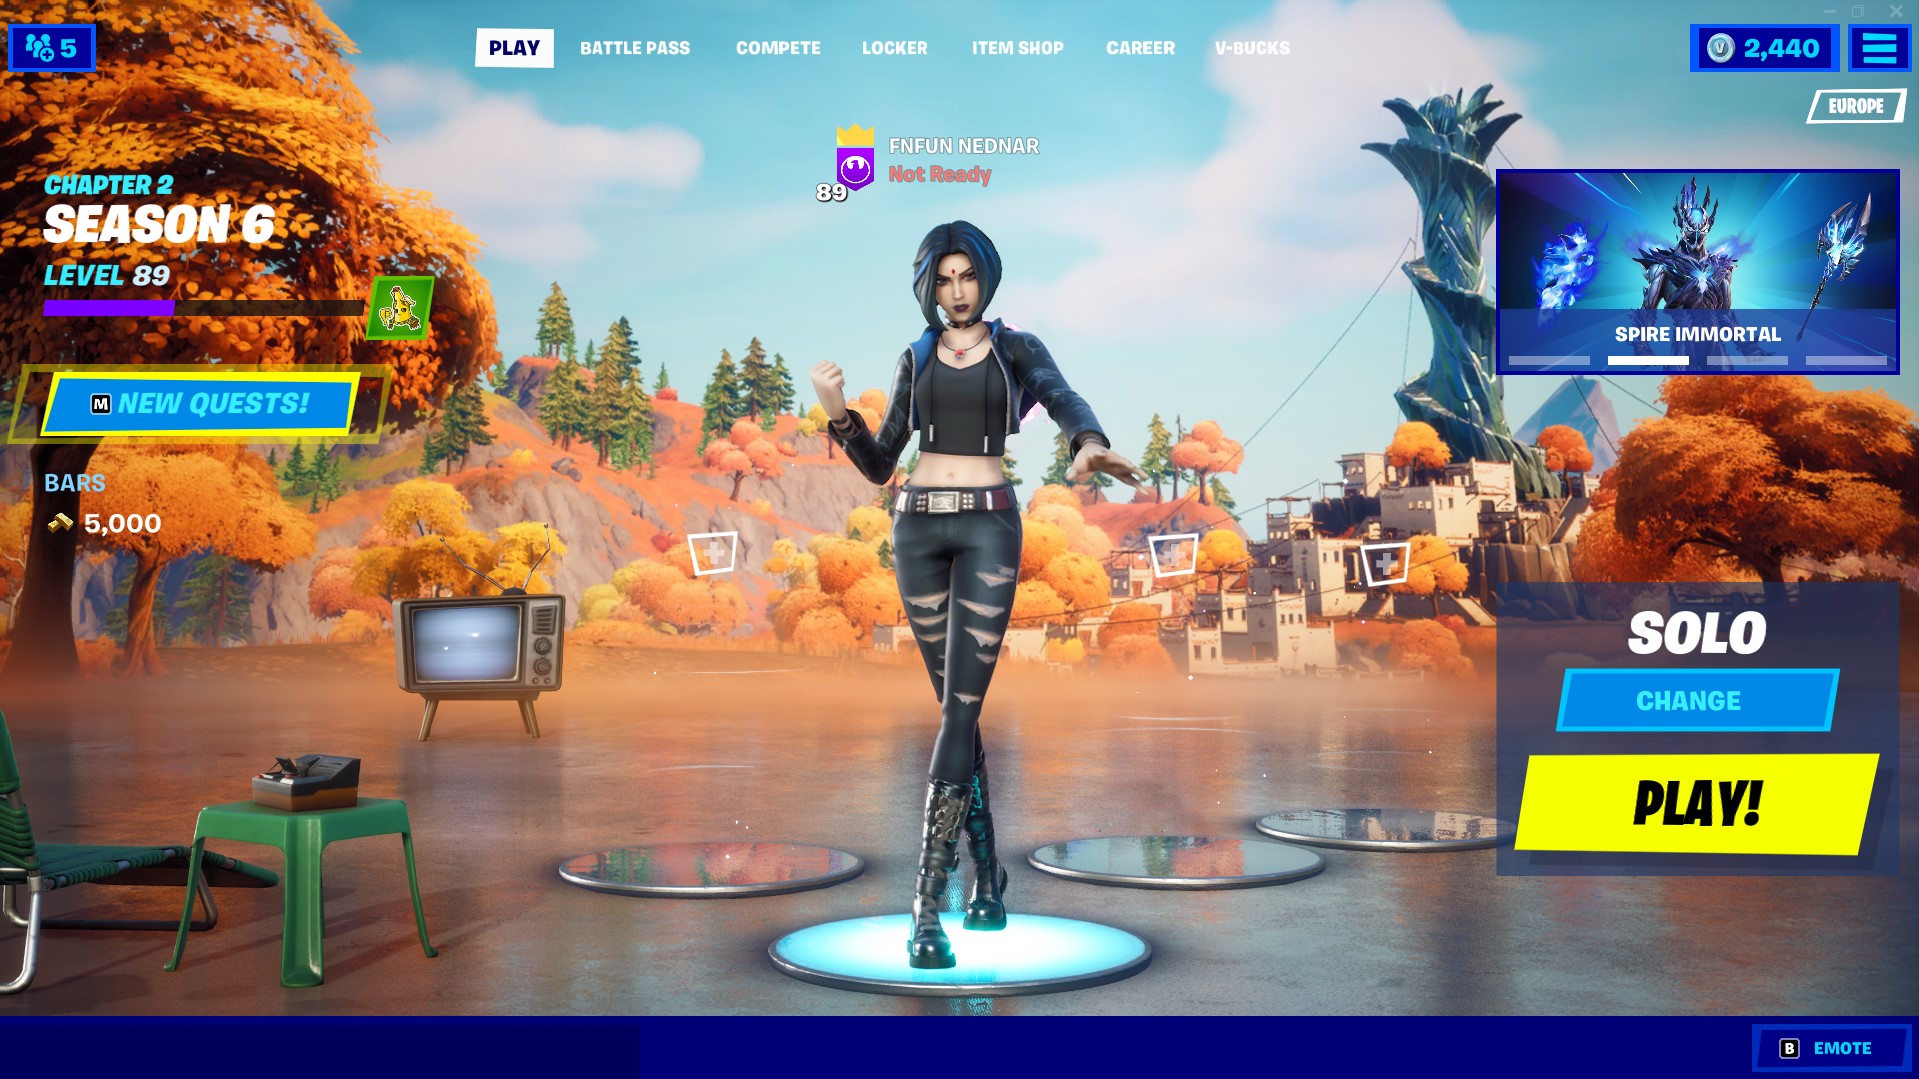 Fortnite lobby has changed right before the end of Chapter 2 Season 6  